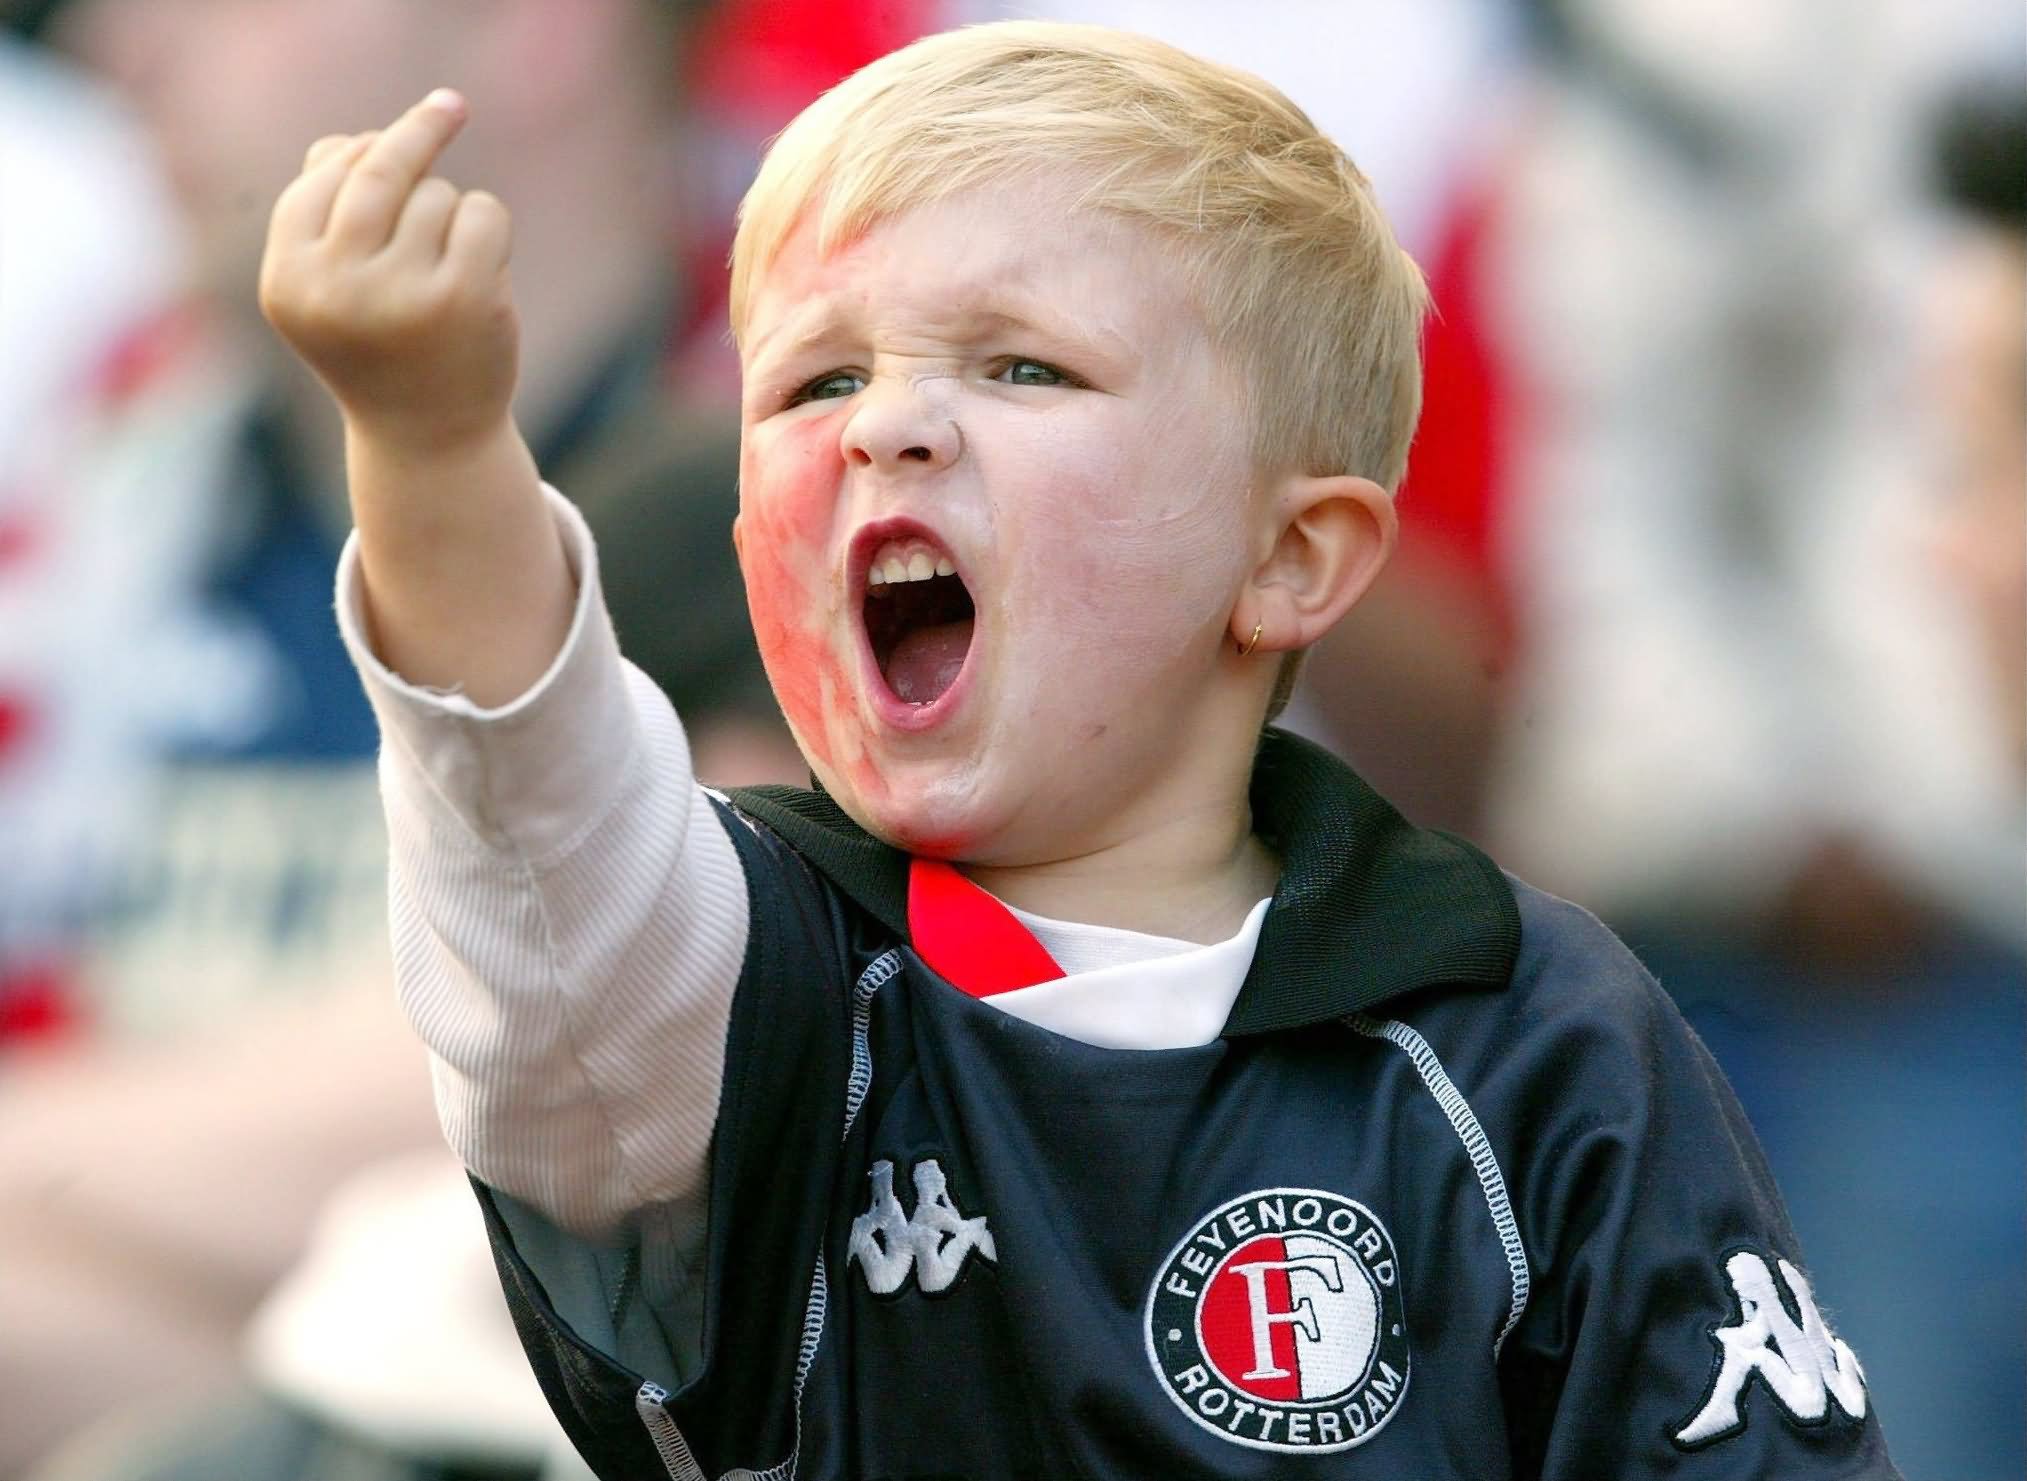 Angry Kid Flip Off Funny Image